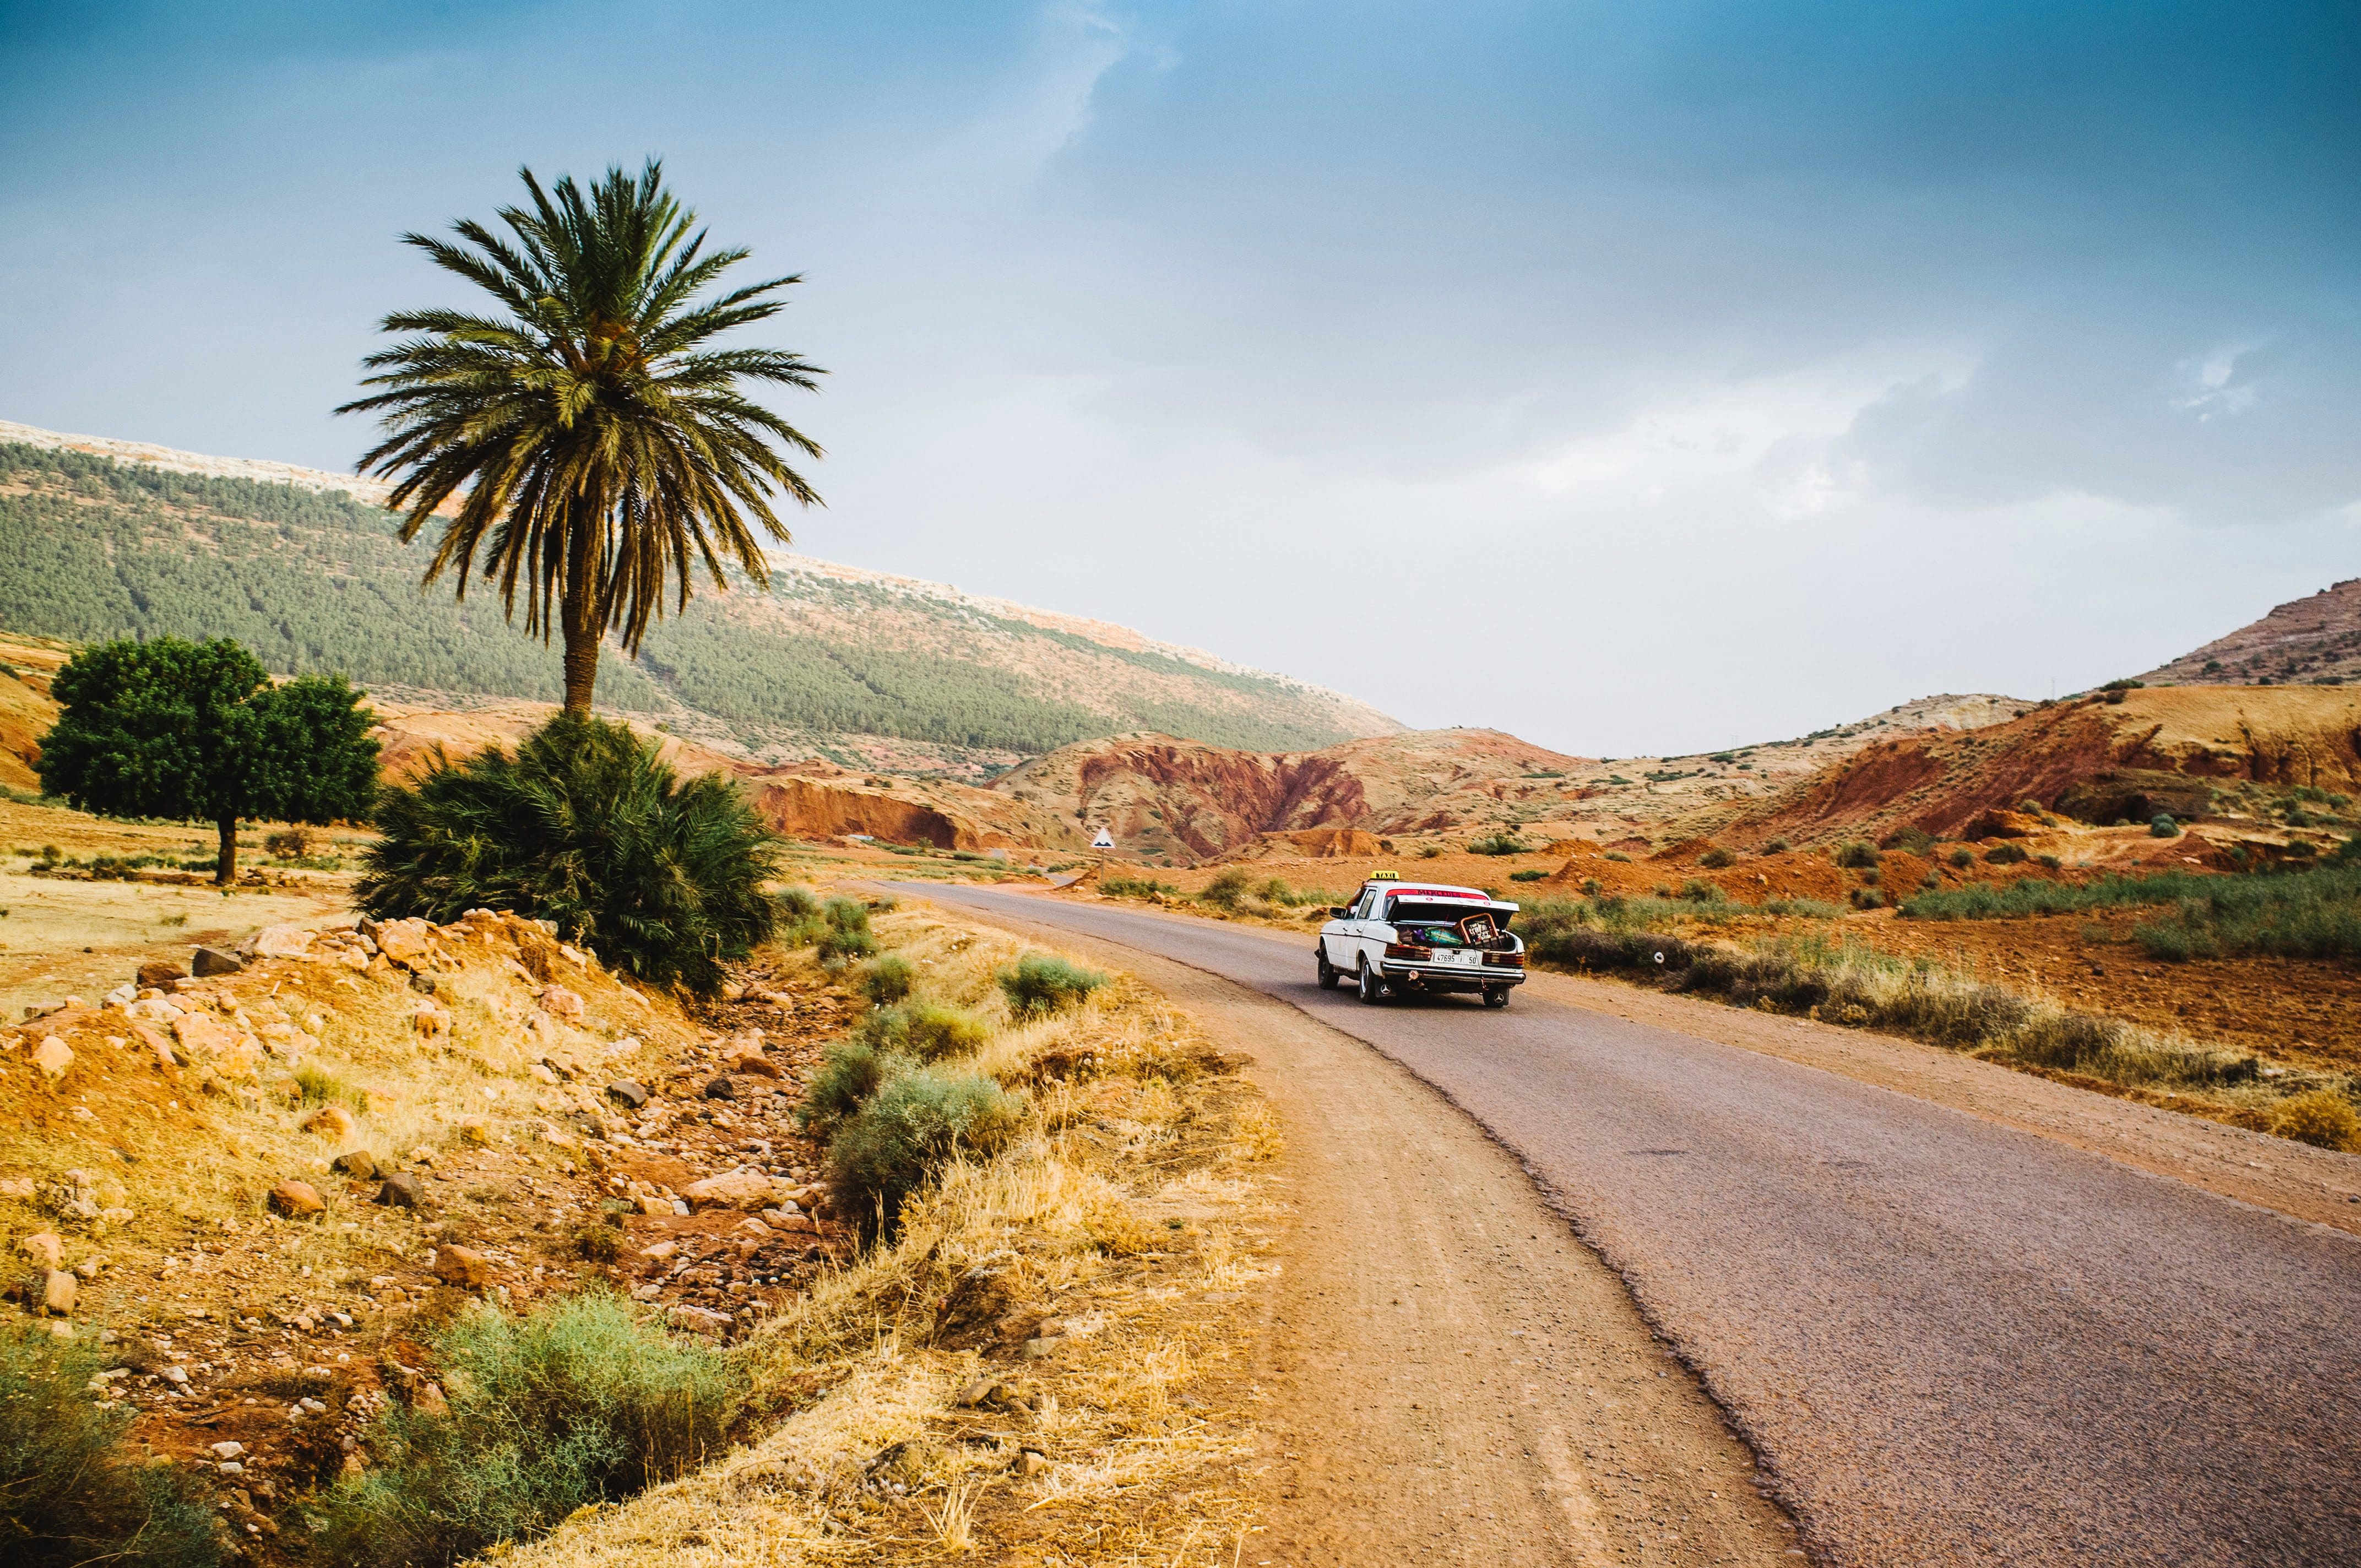 A car drives down a deserted road bordered by palm trees on the way to the Atlas Mountains in the distance